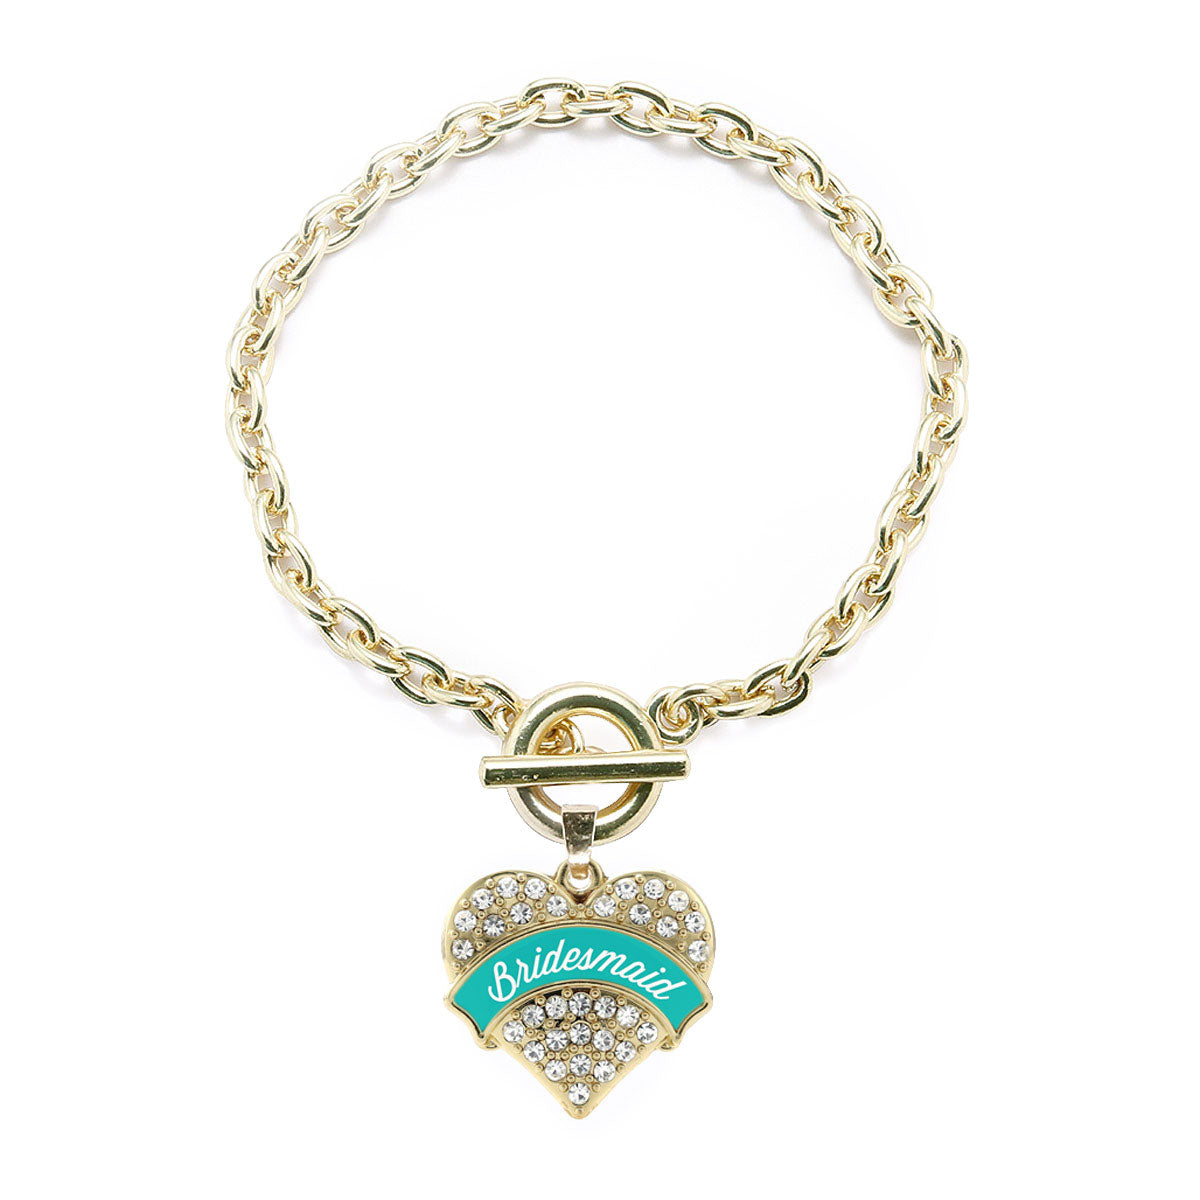 Gold Teal Bridesmaid Pave Heart Charm Toggle Bracelet